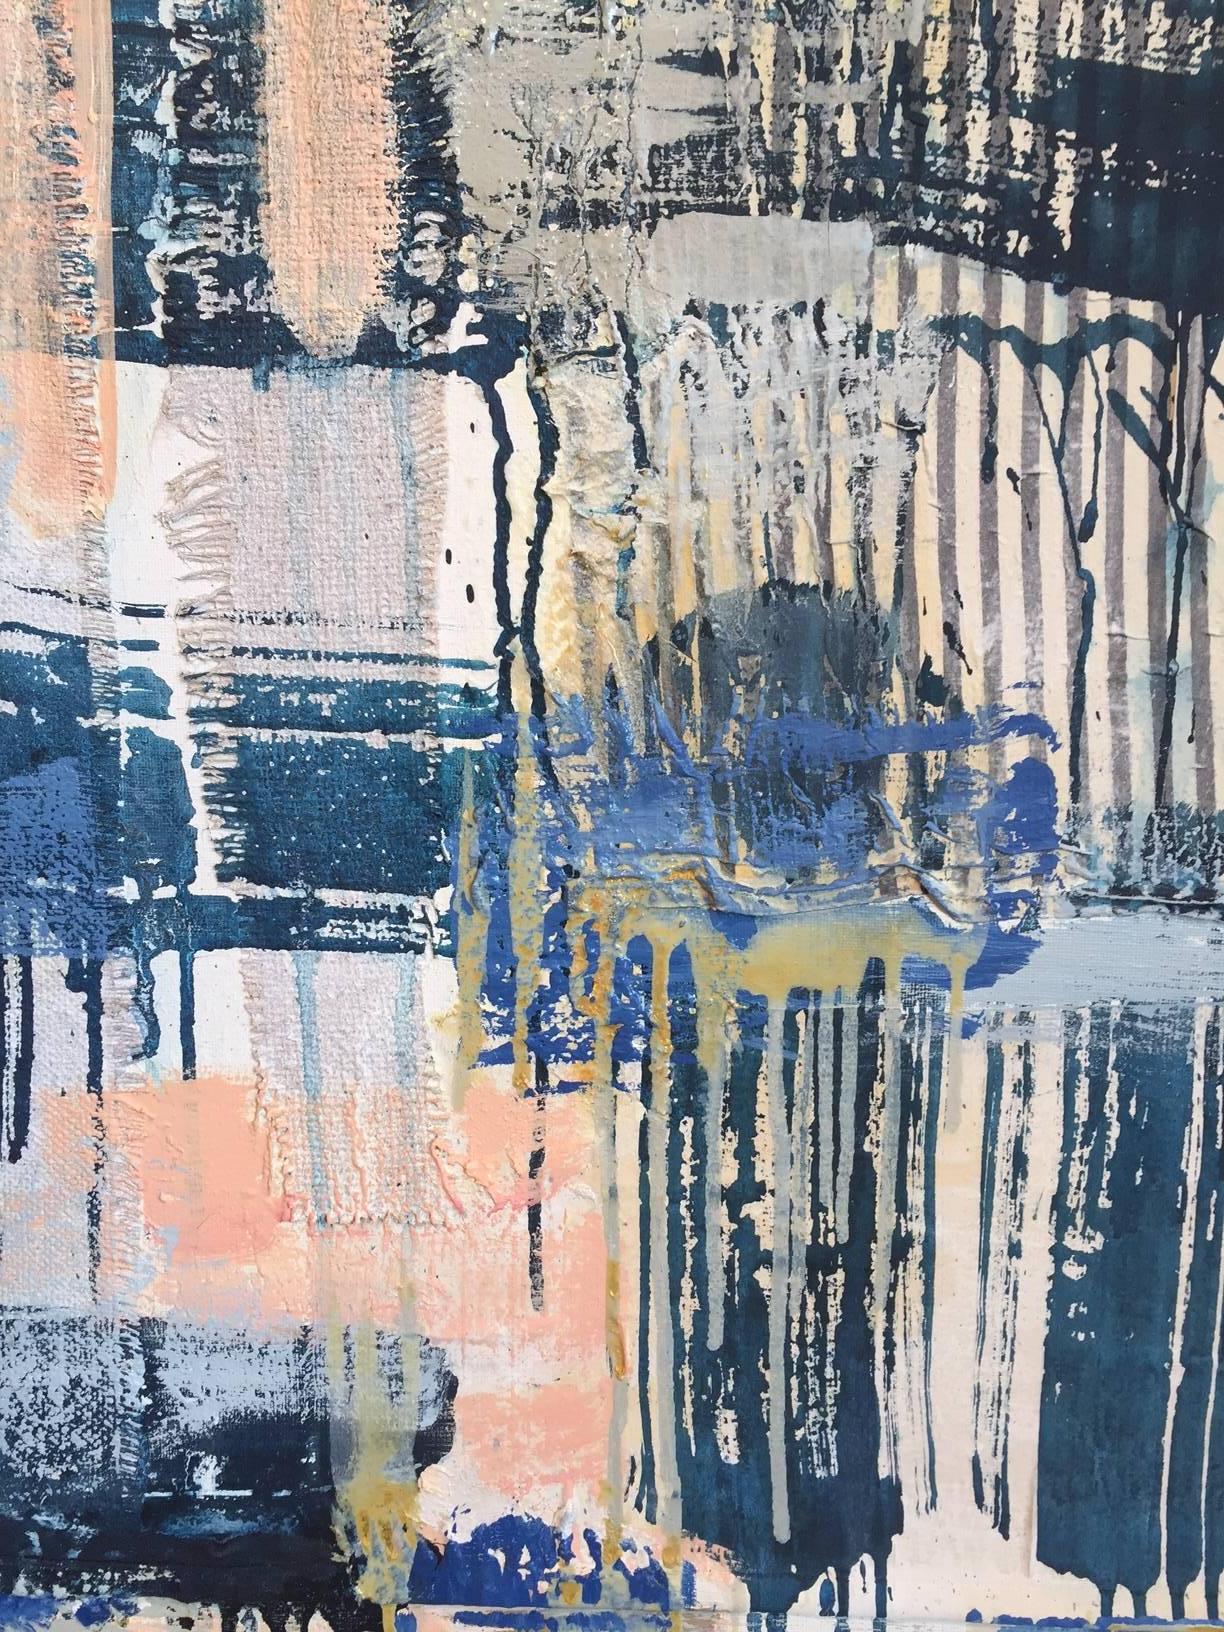 Molly Herman is an abstract painter currently living and working in Greenpoint, Brooklyn.
She is most interested in playing with the language of abstraction.  Her process is a search to find alchemy in the mix between a basic unit:  a mark or